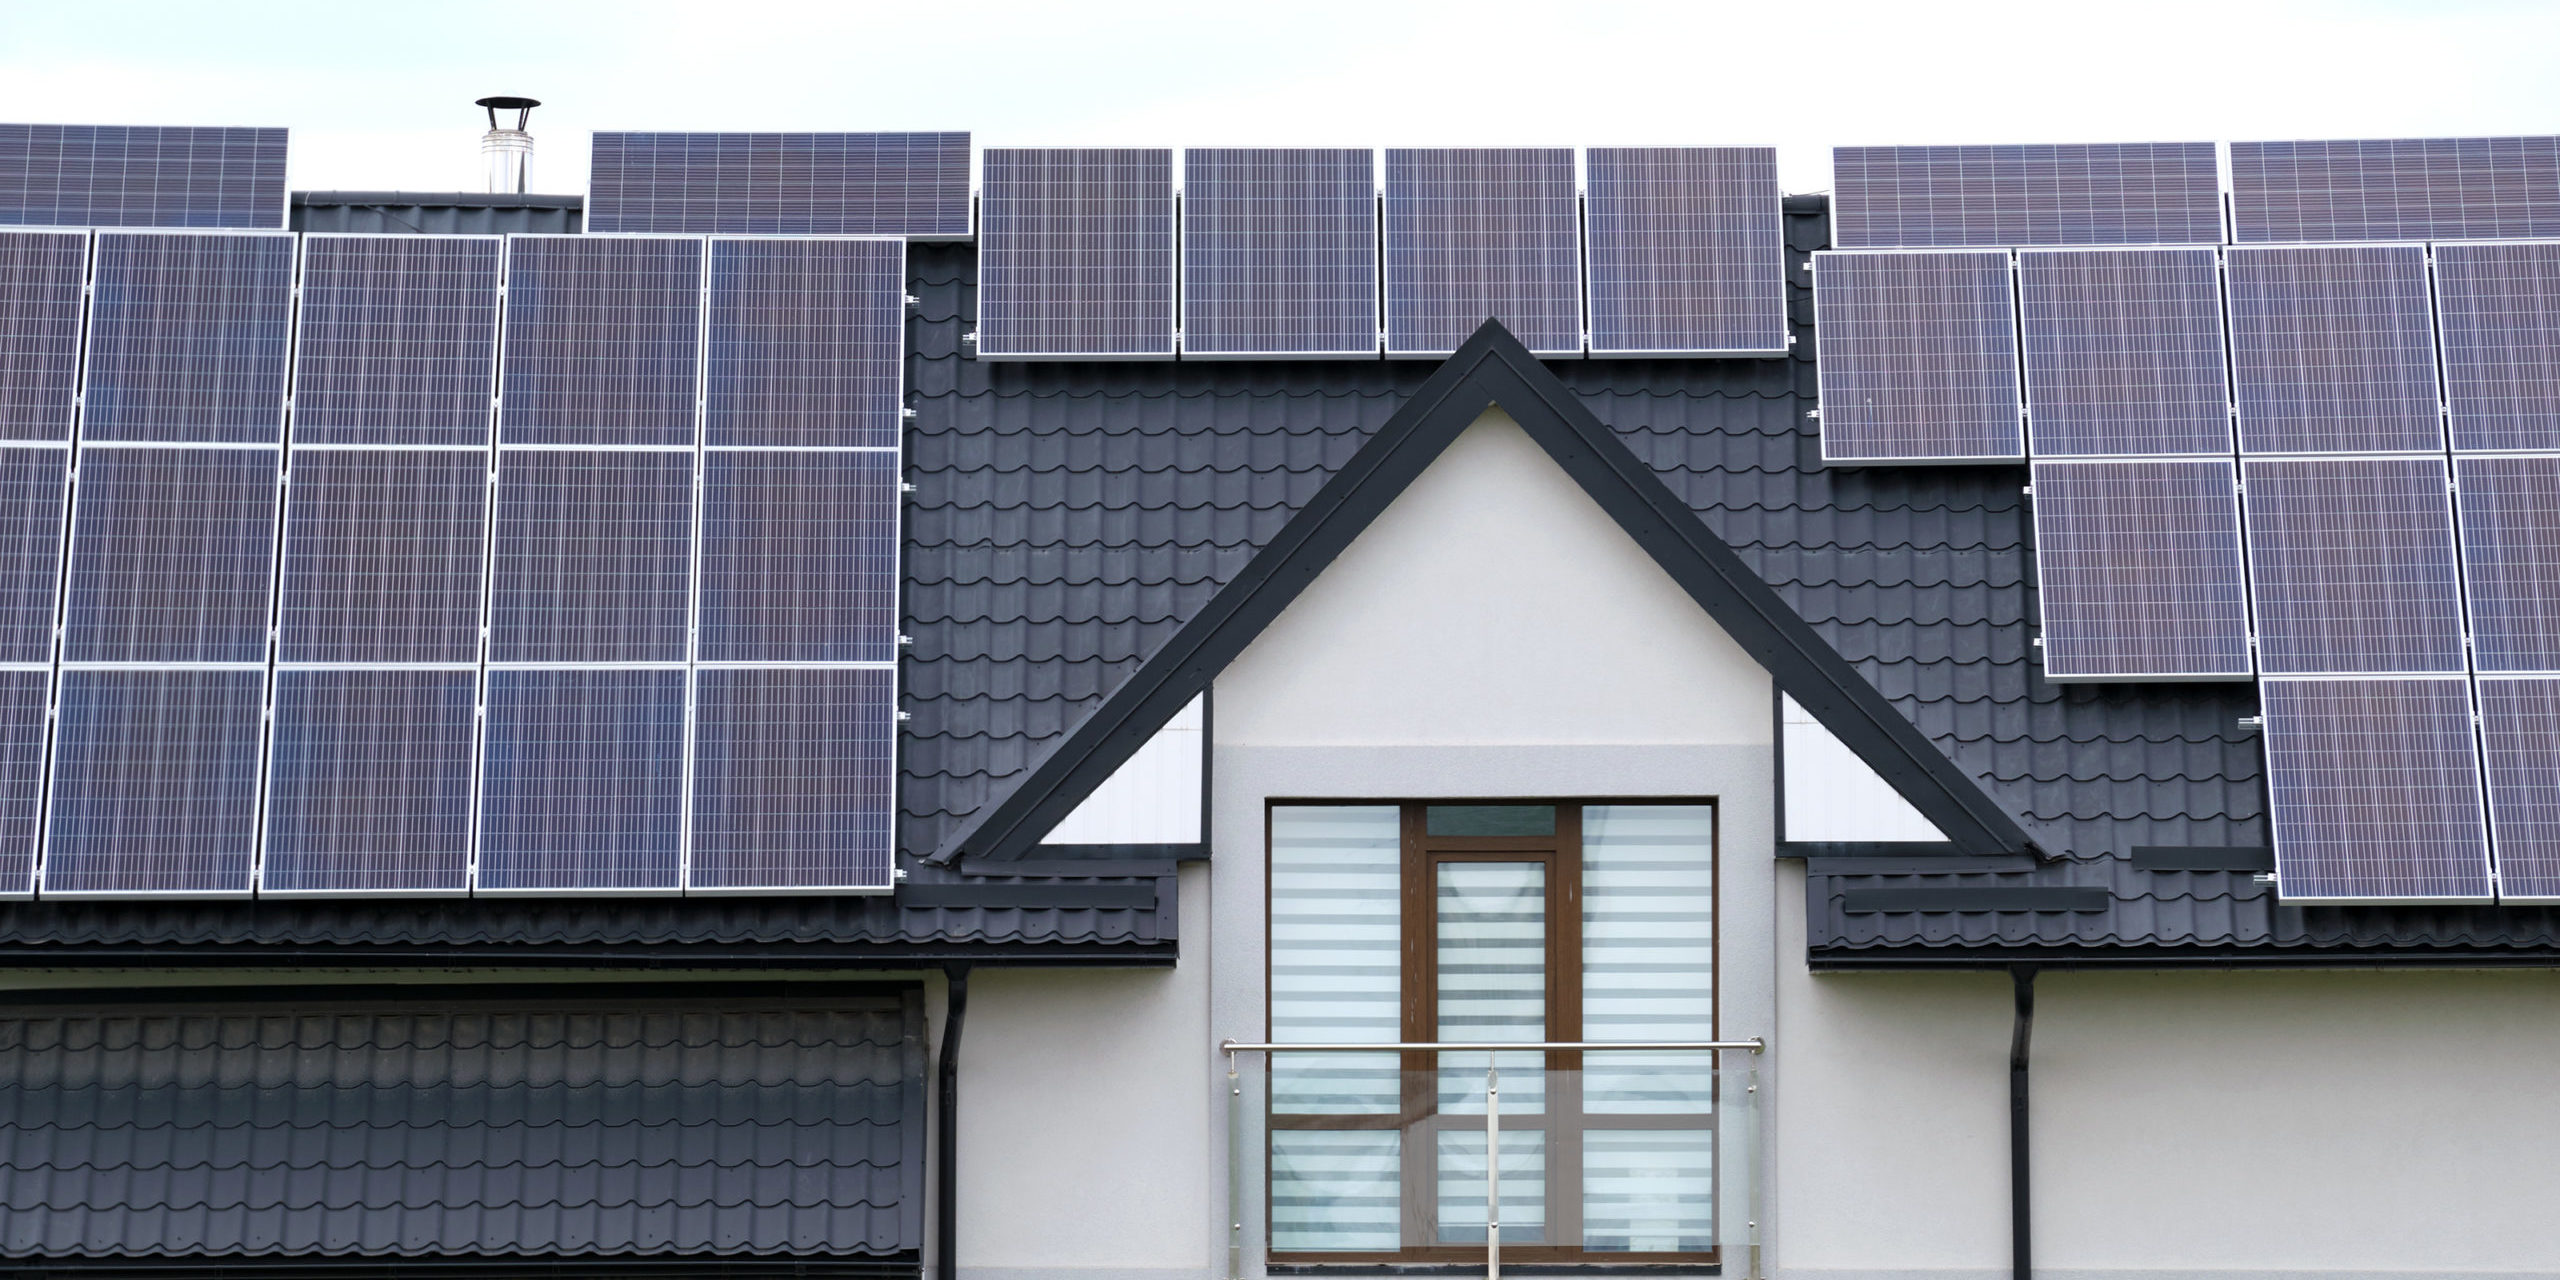 What's the typical lifetime of solar panels ? Are solar panels reliable?